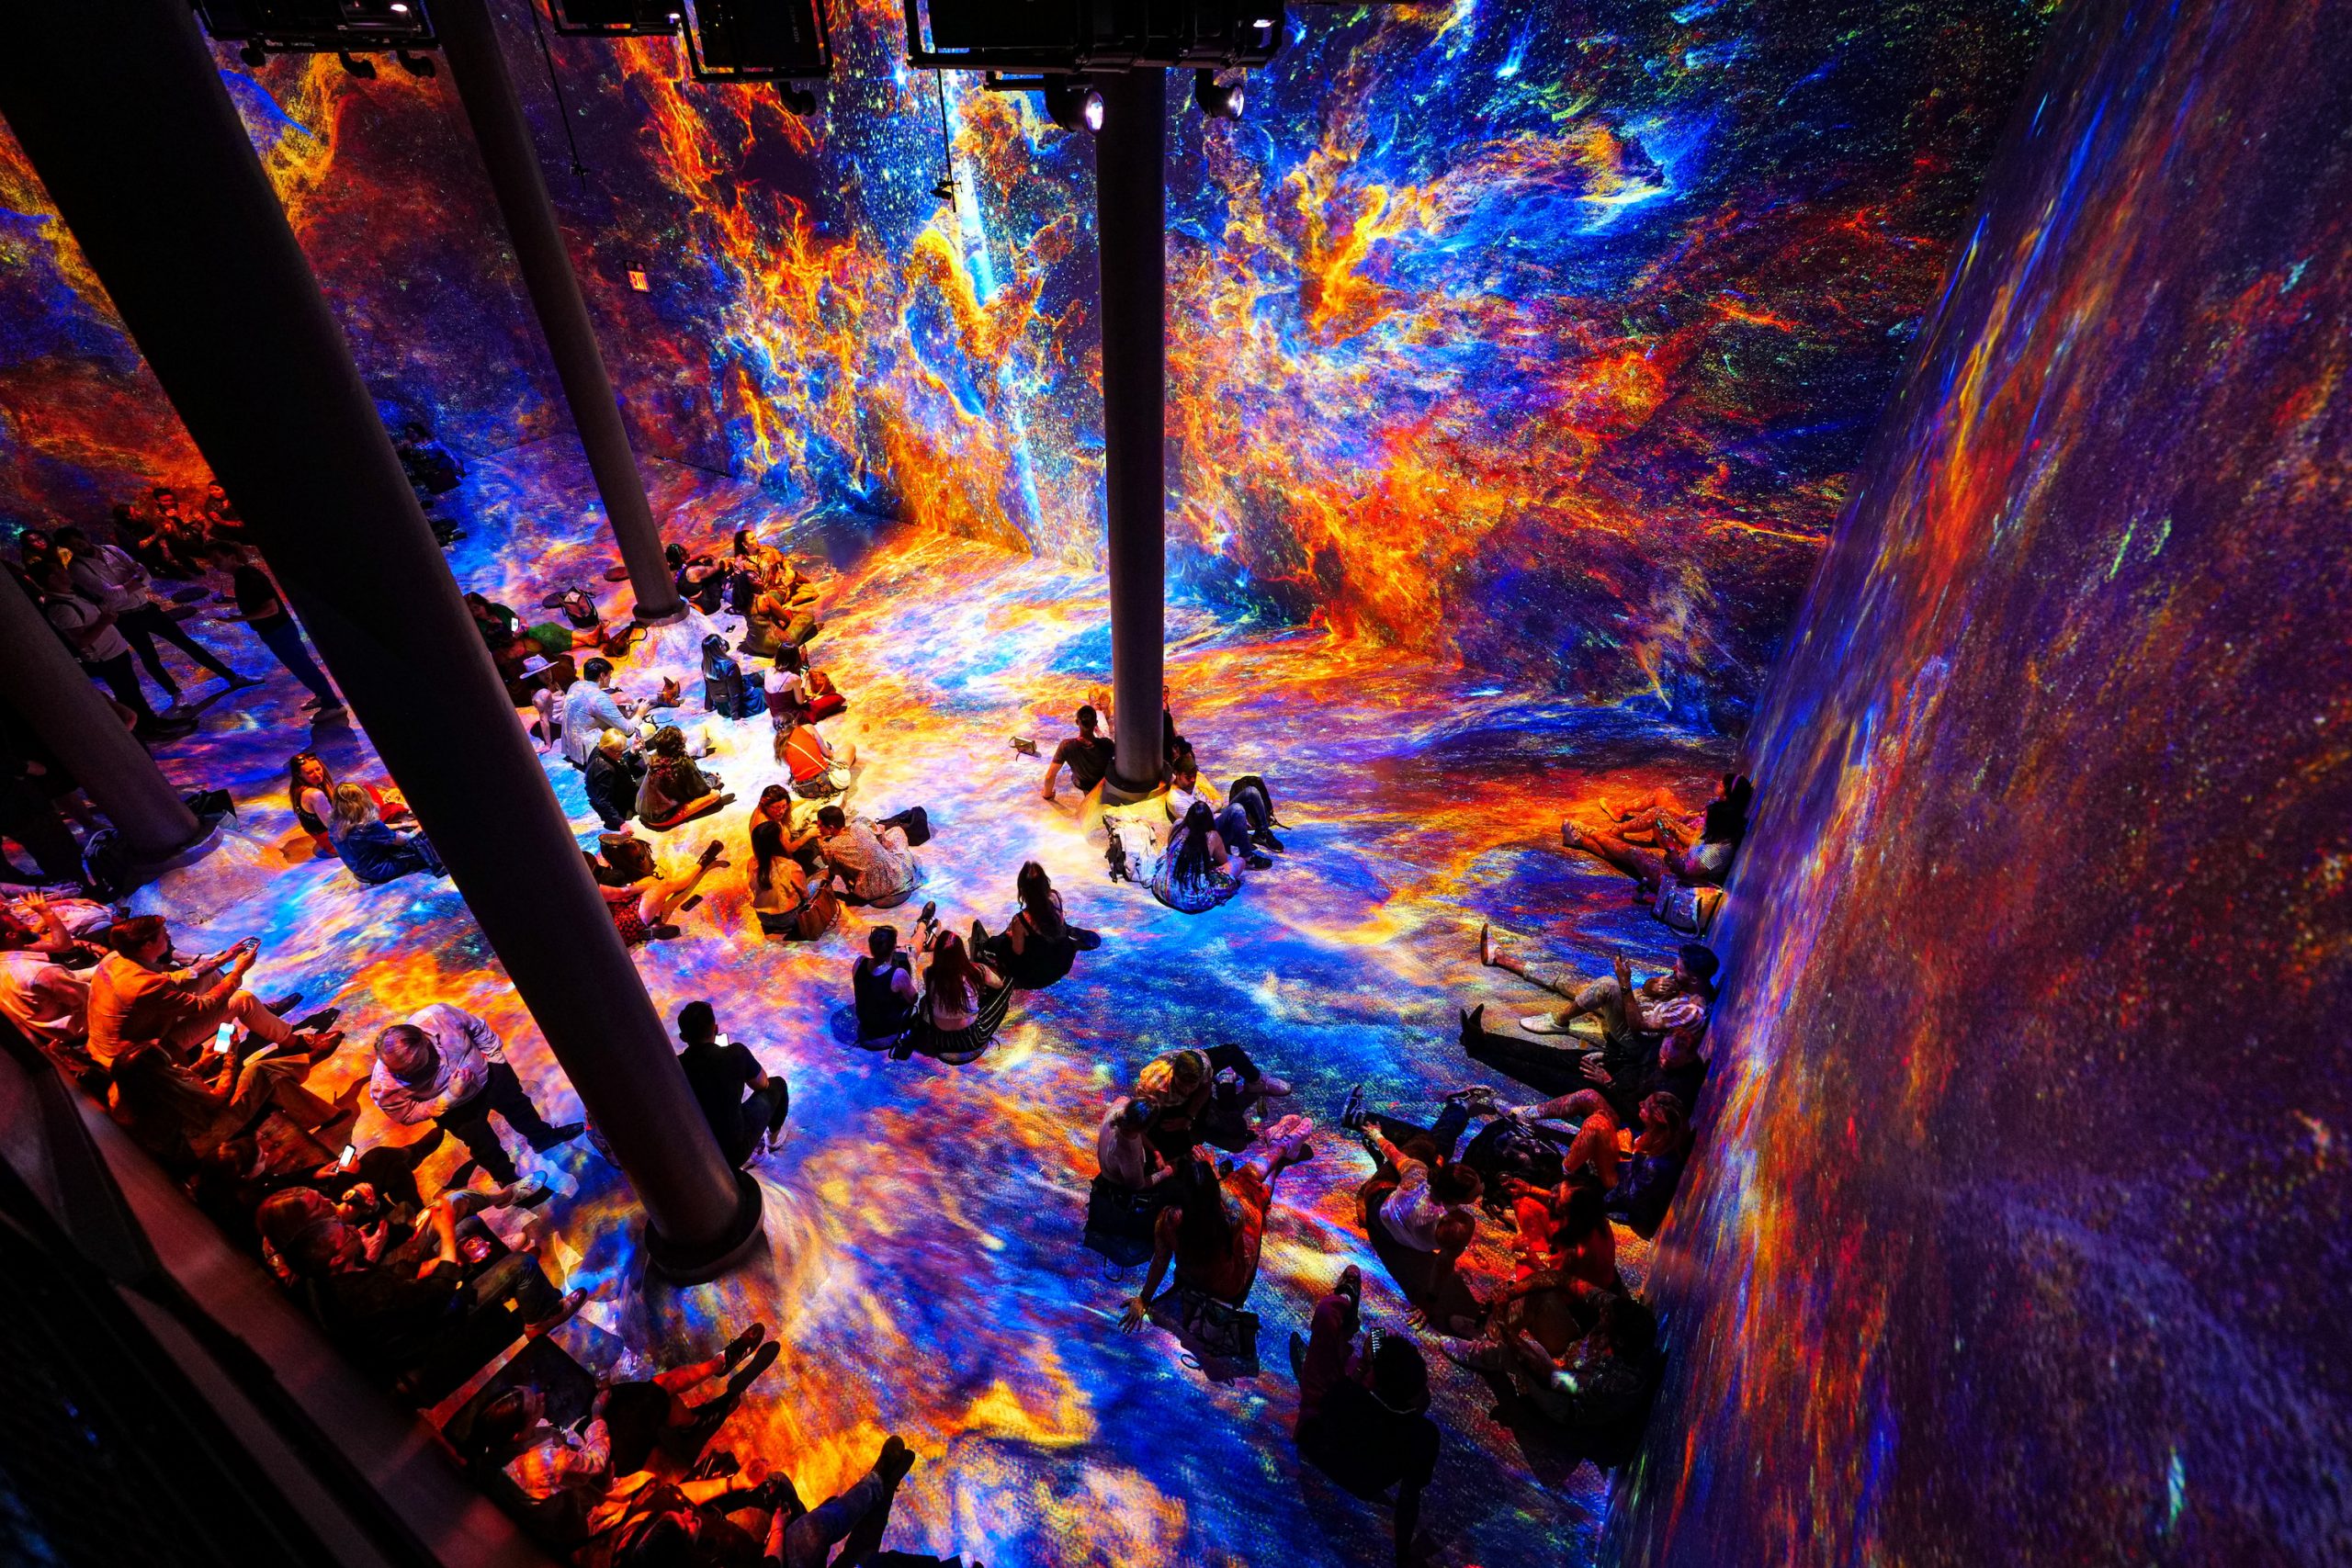 Artechouse's New Immersive Show Weaves NASA Imagery Into a 